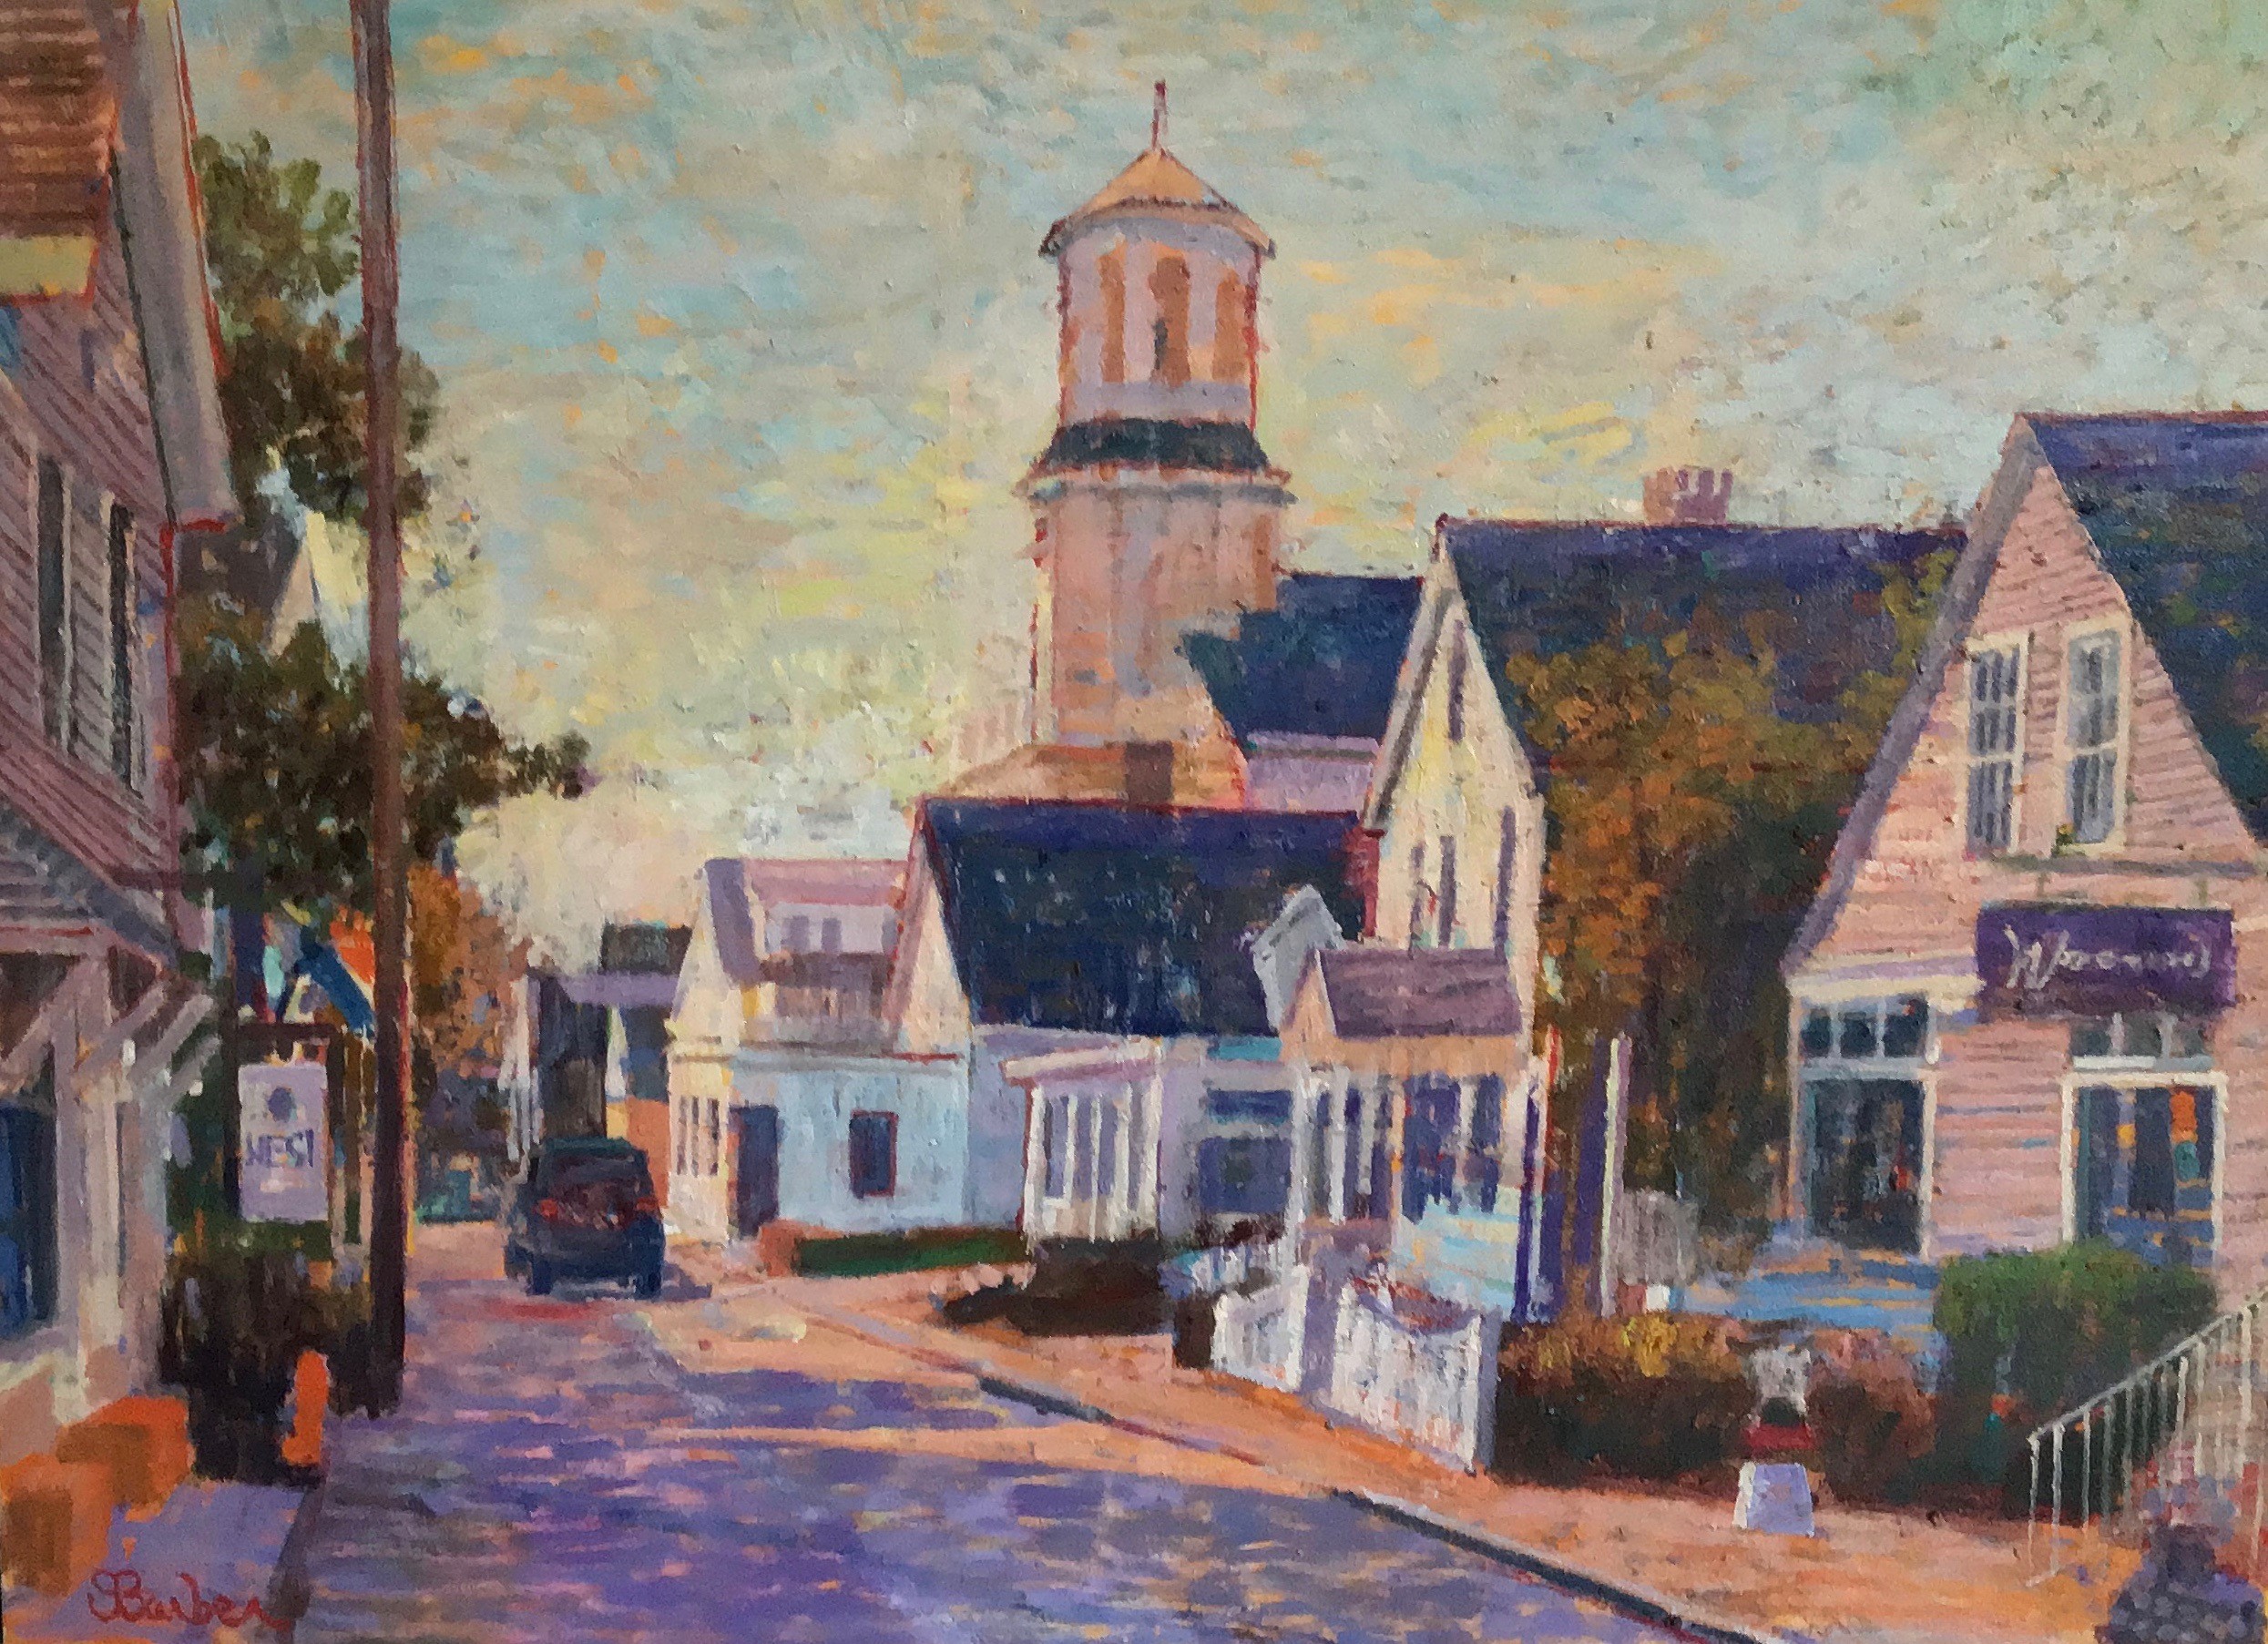 Commercial Street, Provincetown